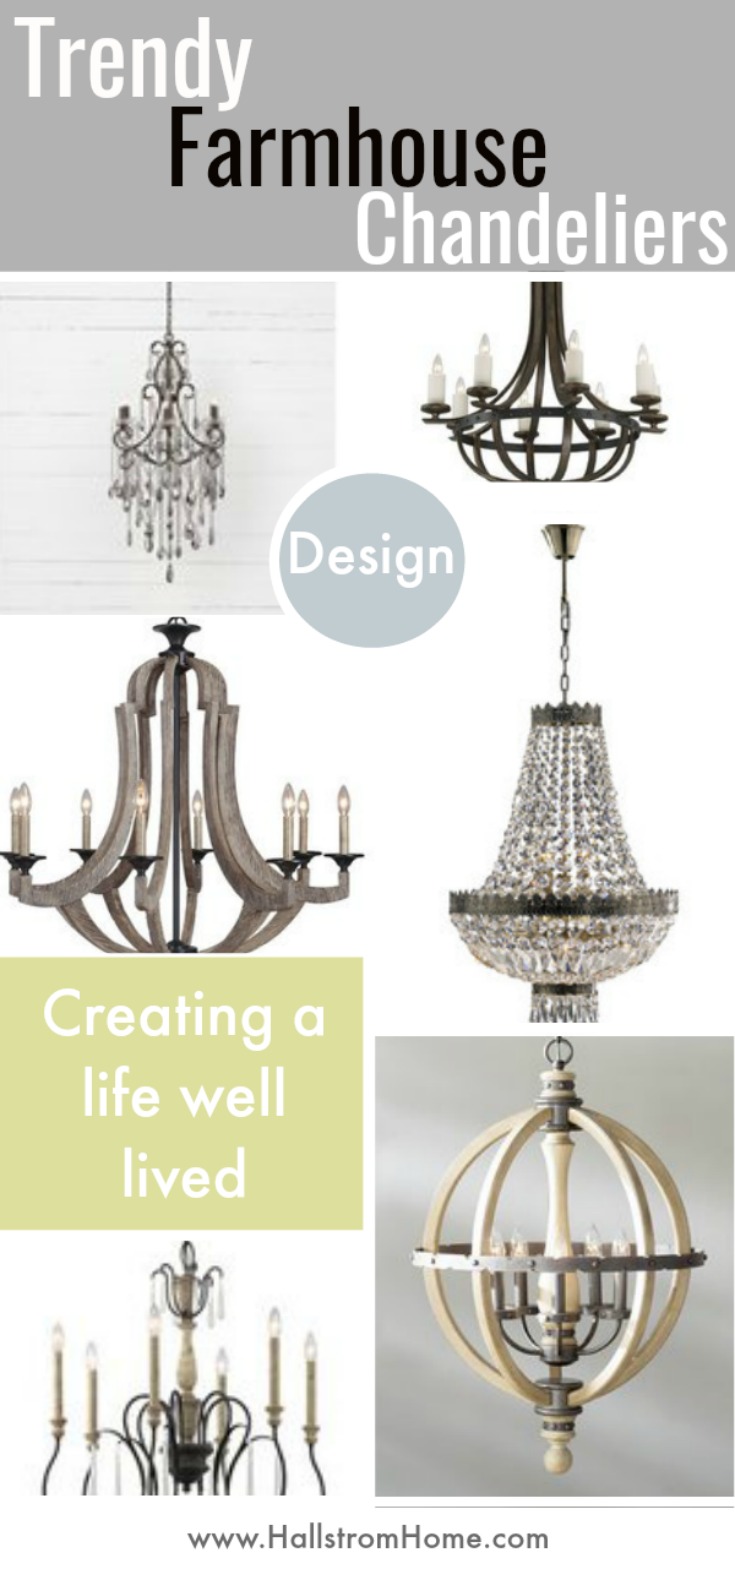 13 Gorgeous Farmhouse Chandeliers for Every Home|farmhouse chandelier|shabby chic lighting|shabby chic chandelier|farmhouse lighting|crystal chandelier|wood chandelier|farmhouse pendant|wood bead chandelier|shabby chic home|farmhouse home decor|bedroom lighting|kitchen lighting|lighting|hallstromhome